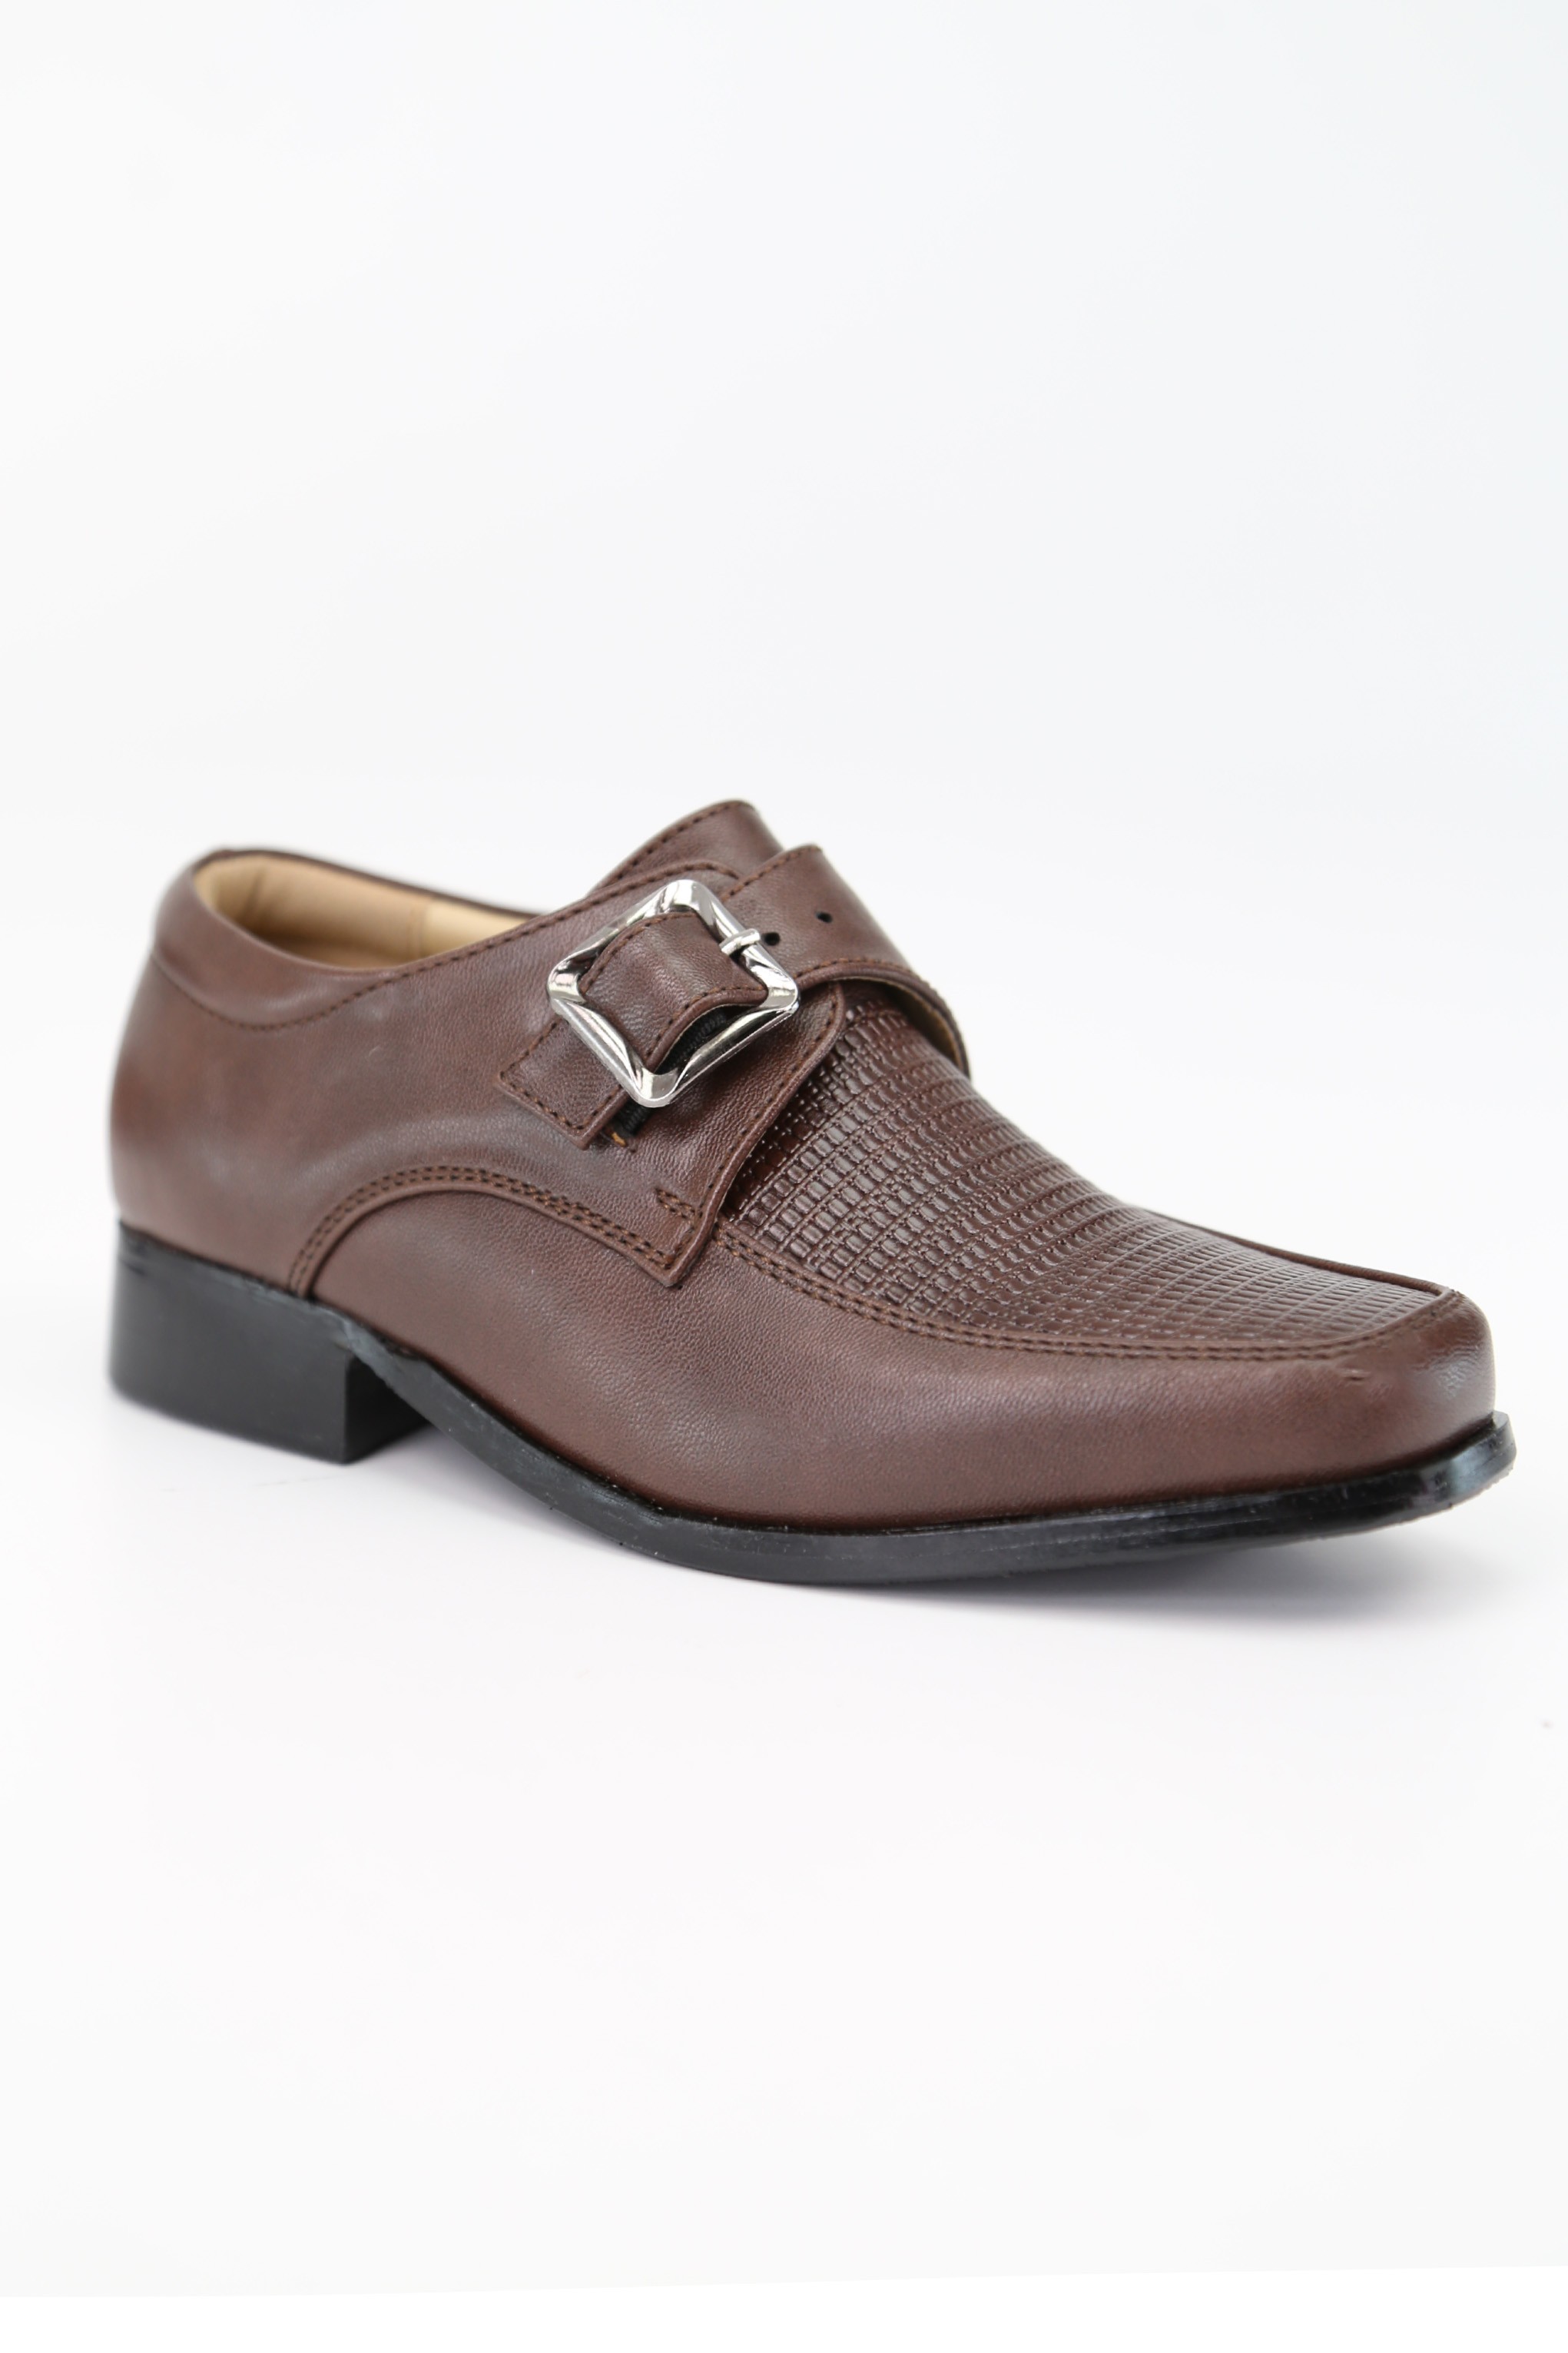 Boys Textured Leather Buckled Monk Shoes - Brown